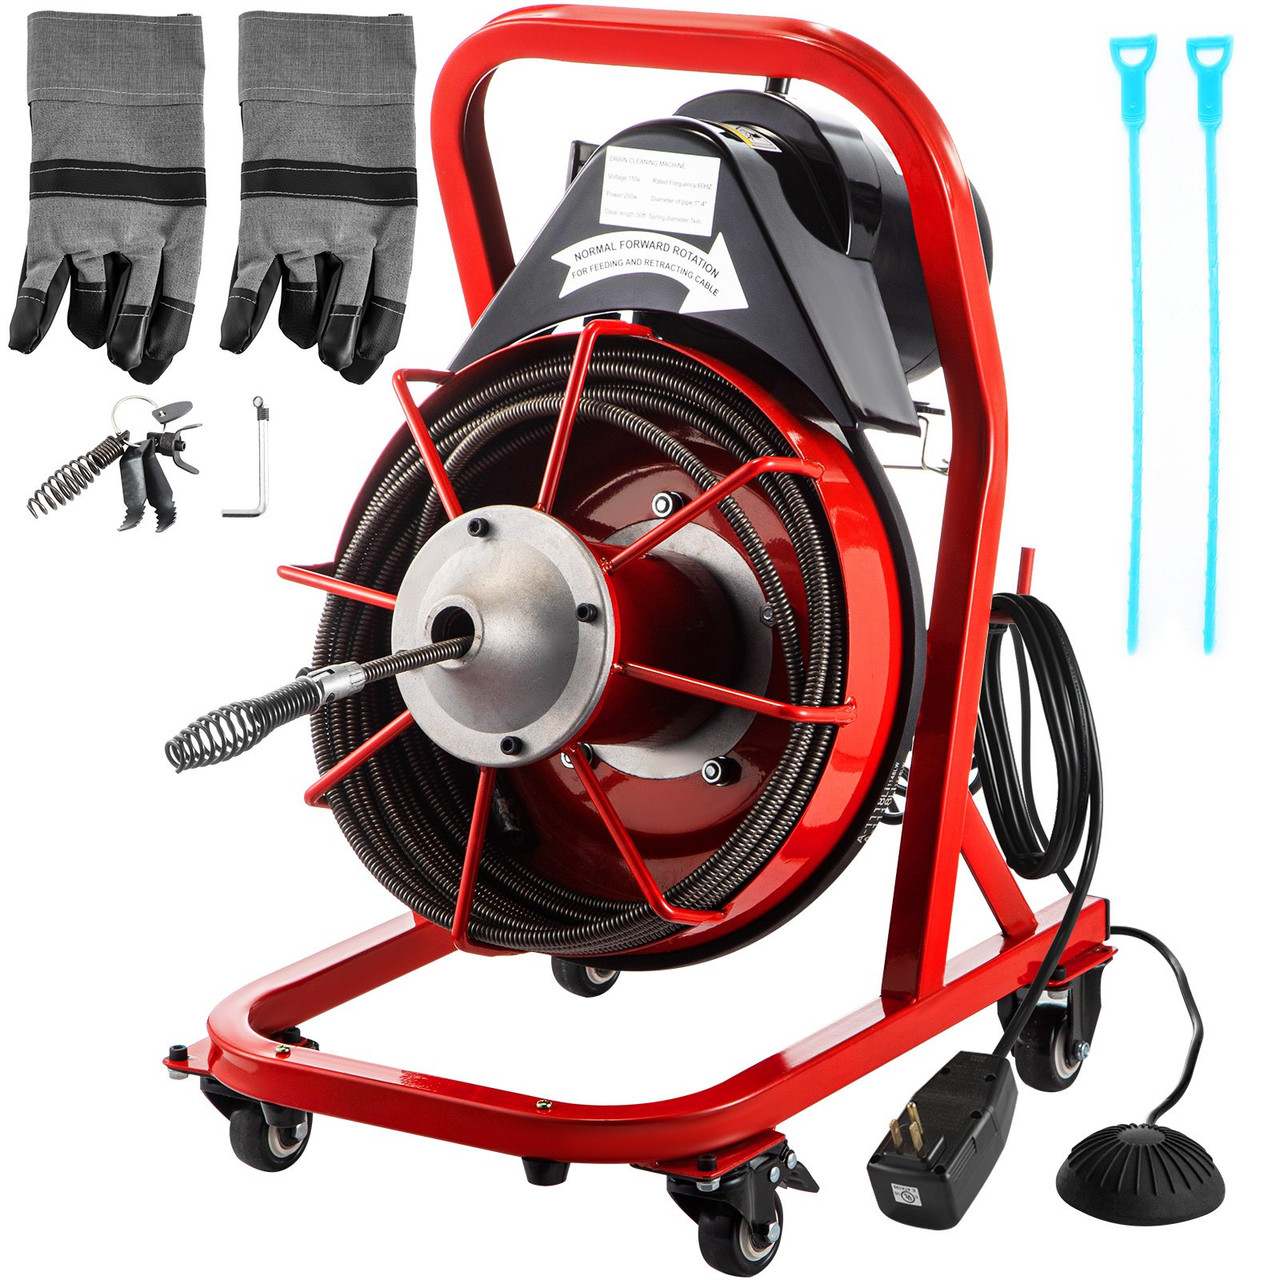 Electric Drain Auger, 75' x 3/8", 250W Drain Cleaner Machine Fit 2''- 4'' Pipes, Hair Catcher for Kitchen Sink, Bathroom Tub, Toilet Clogged, Drains Dredge, Foliose Sewers